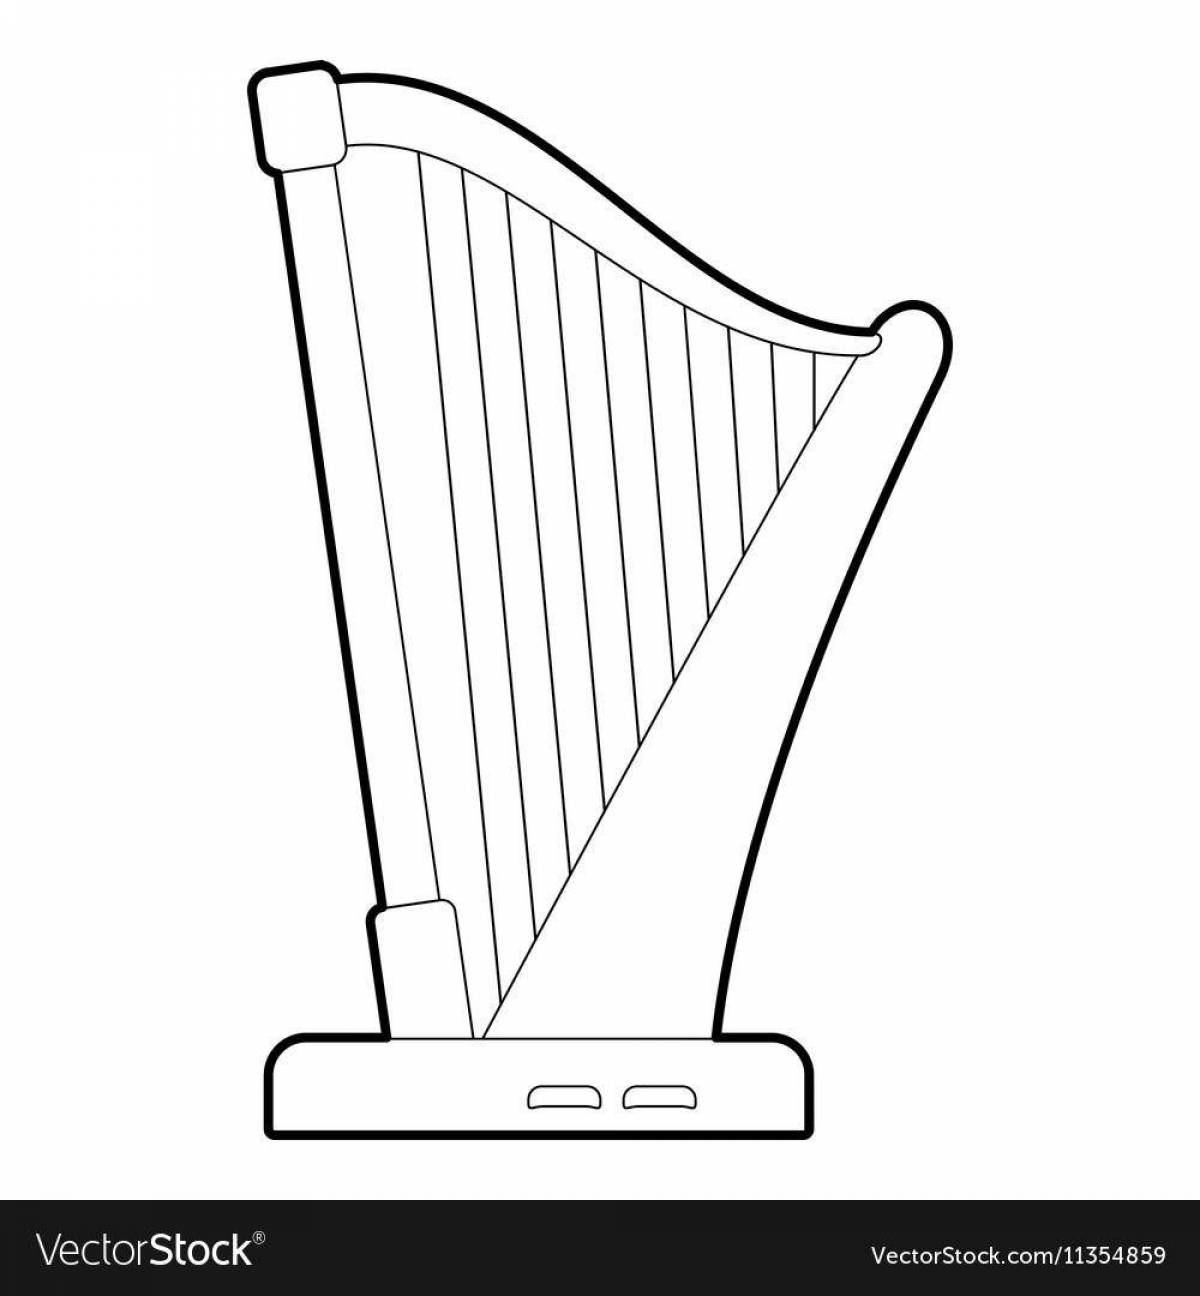 Glowing harp coloring book for kids